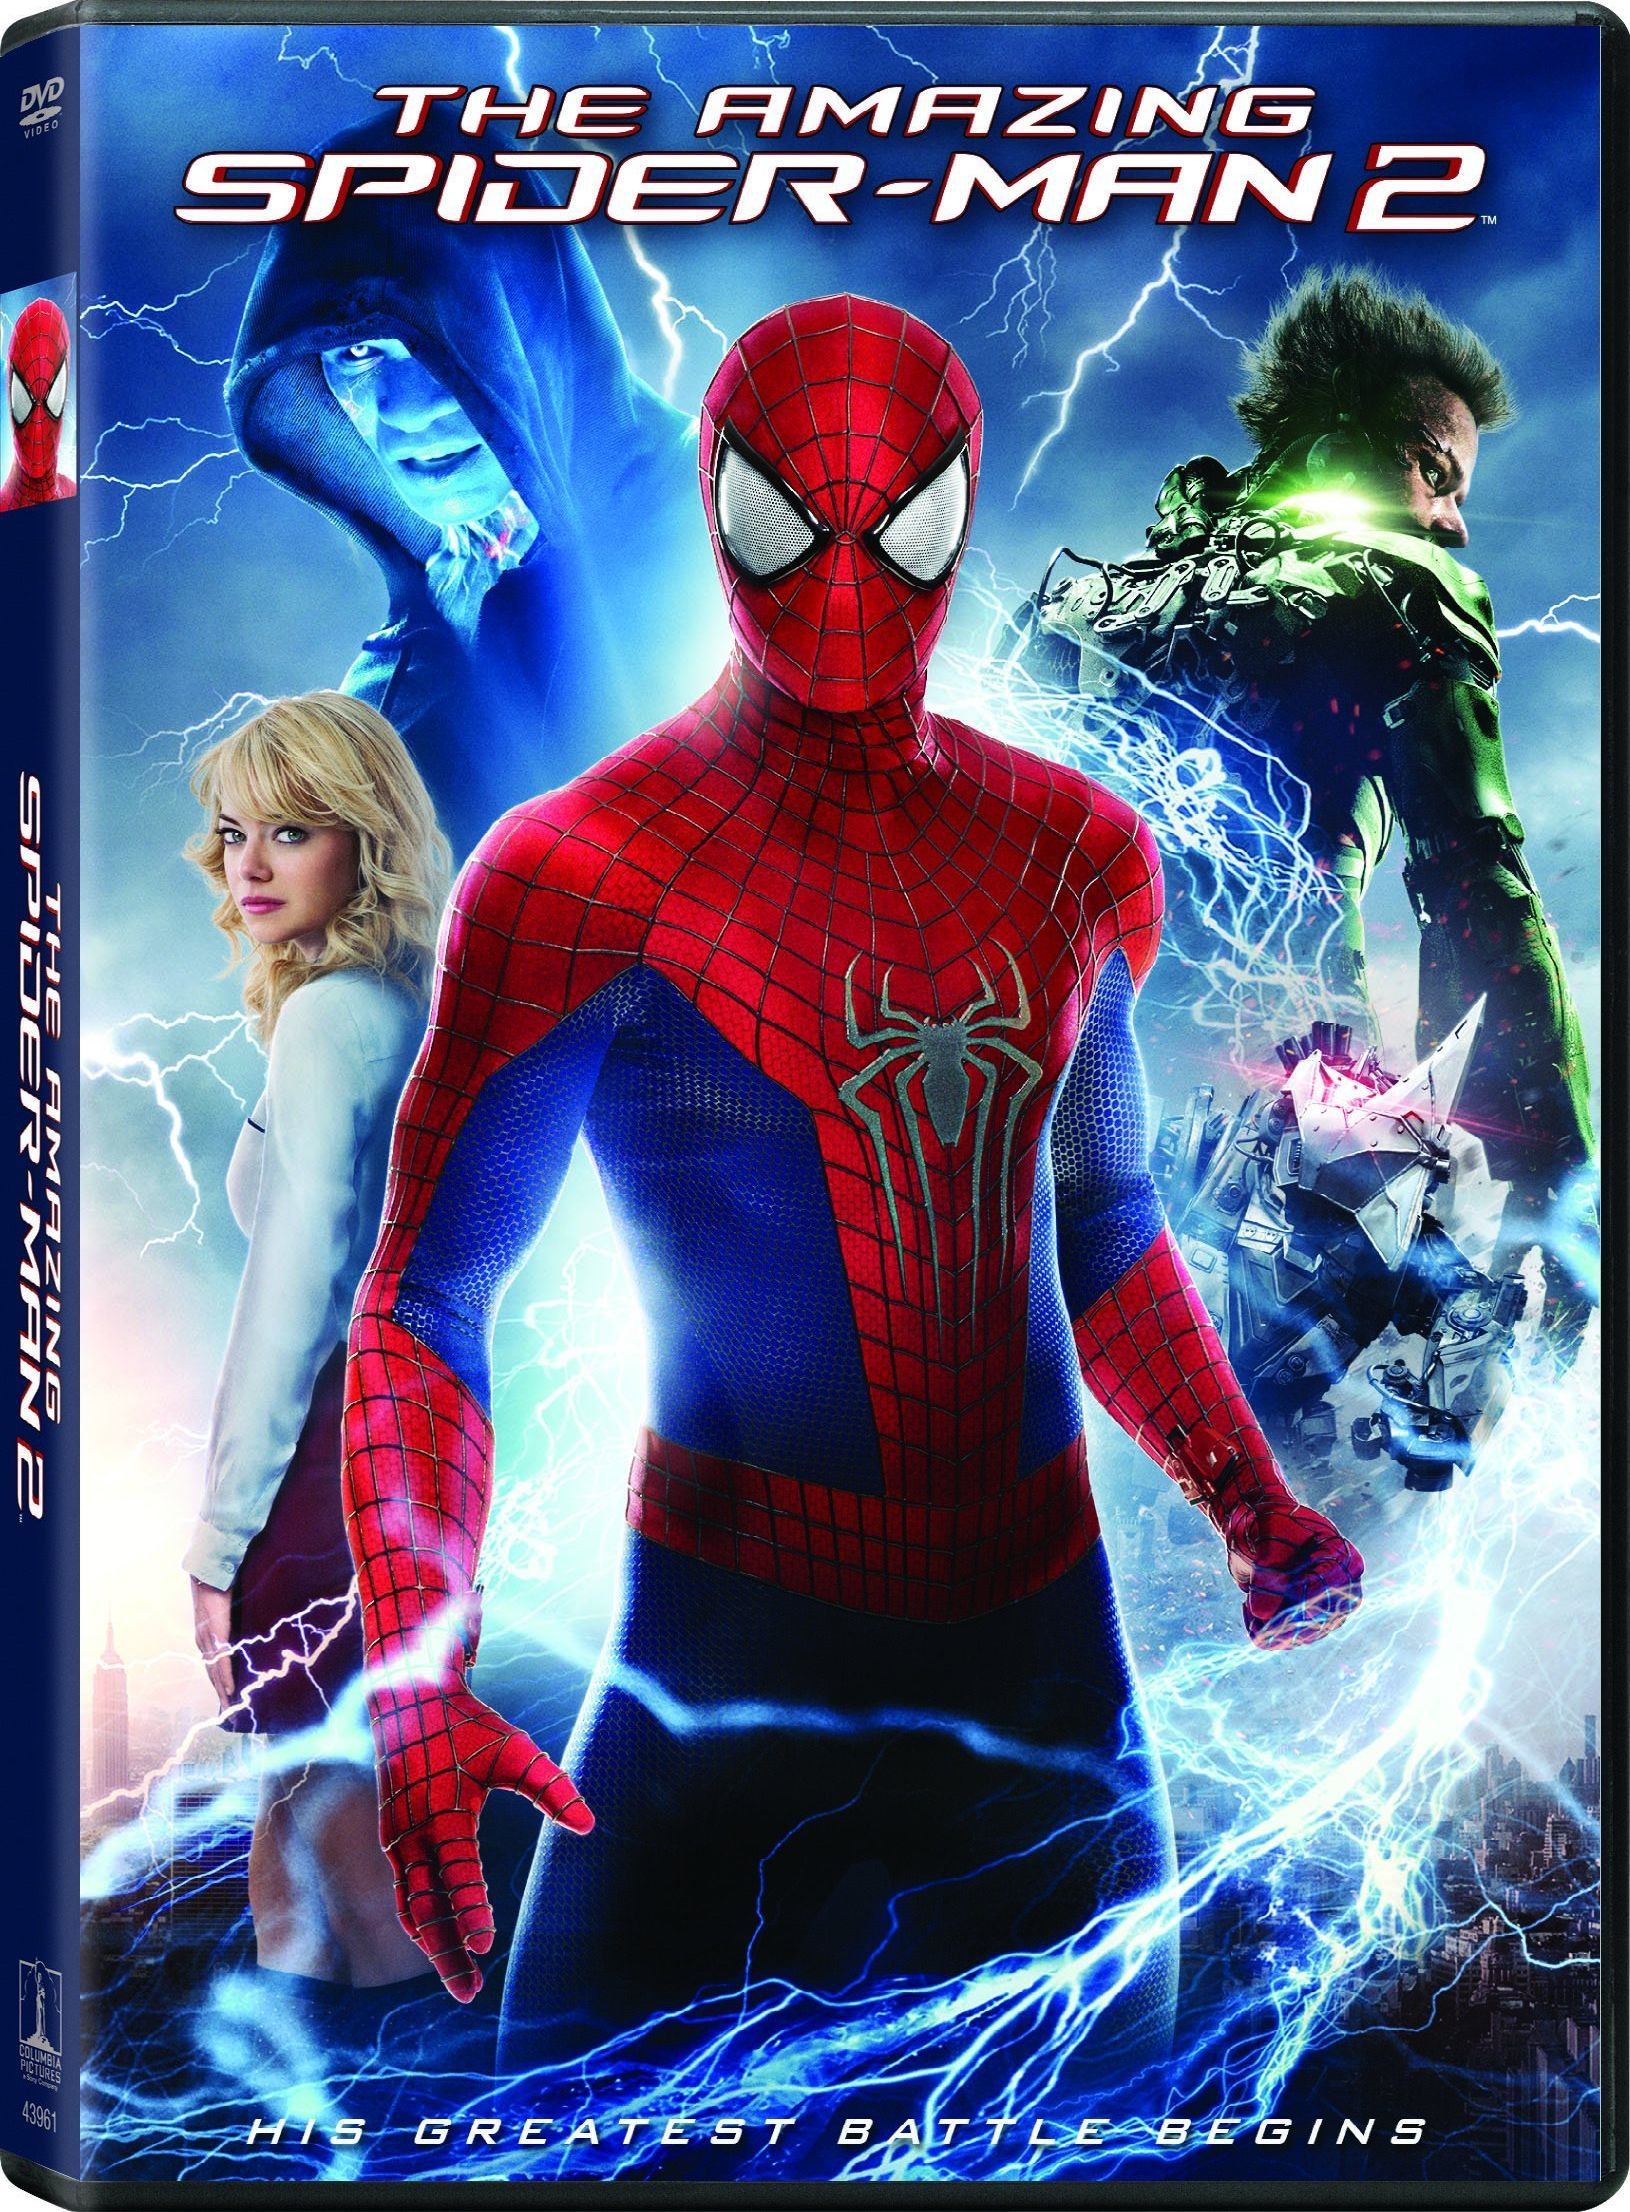 Gra ACTIVISION BLIZZARD The Amazing Spider-Man 2 ENG (PC) 5030917142680